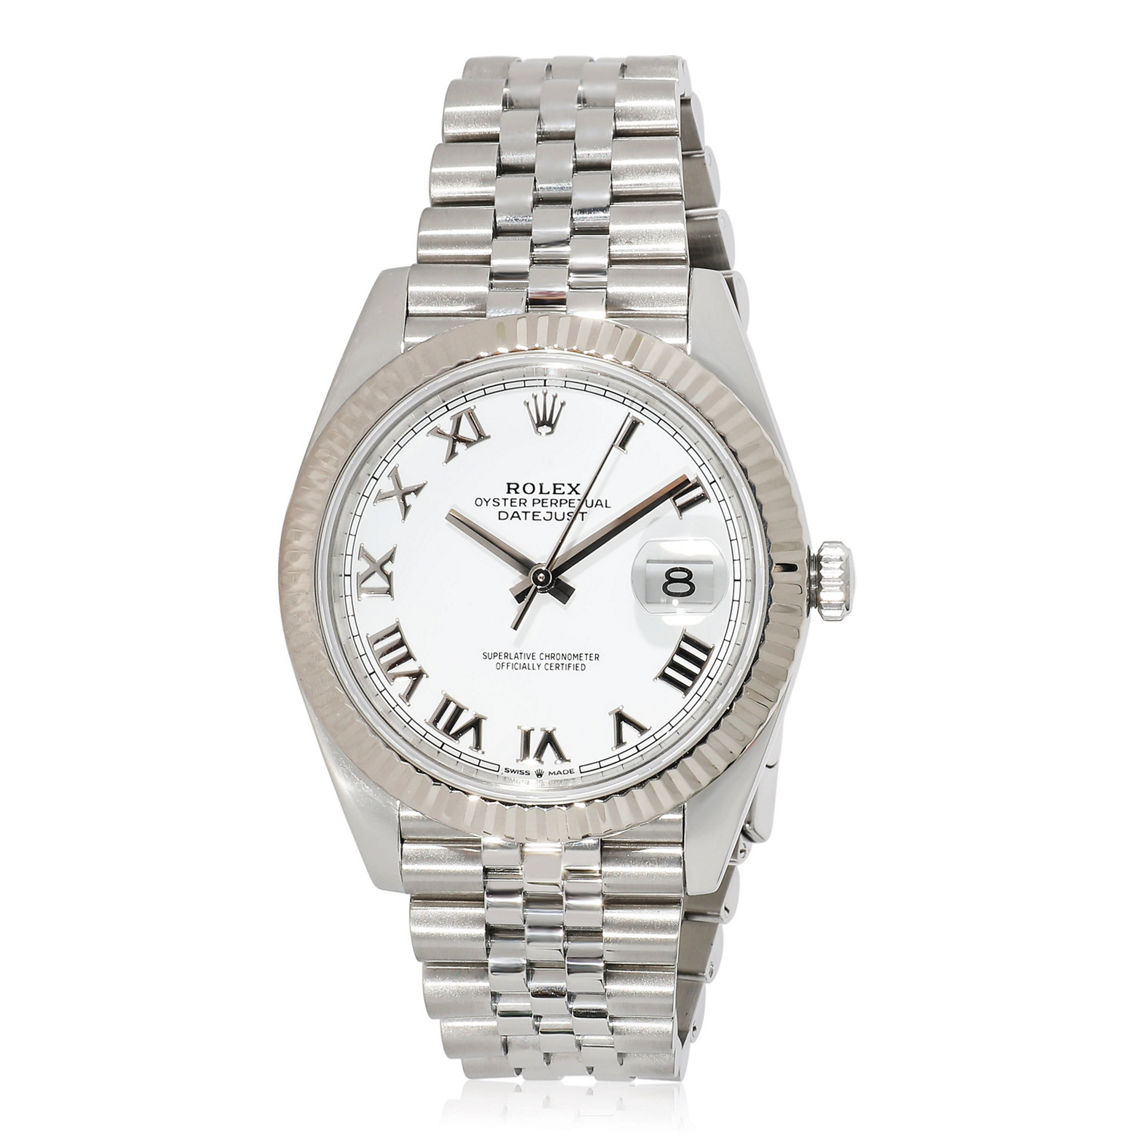 Rolex Datejust 41 126334 Men's Watch in 18kt Stainless Steel/White Gold Pre-Owned - Image 3 of 3